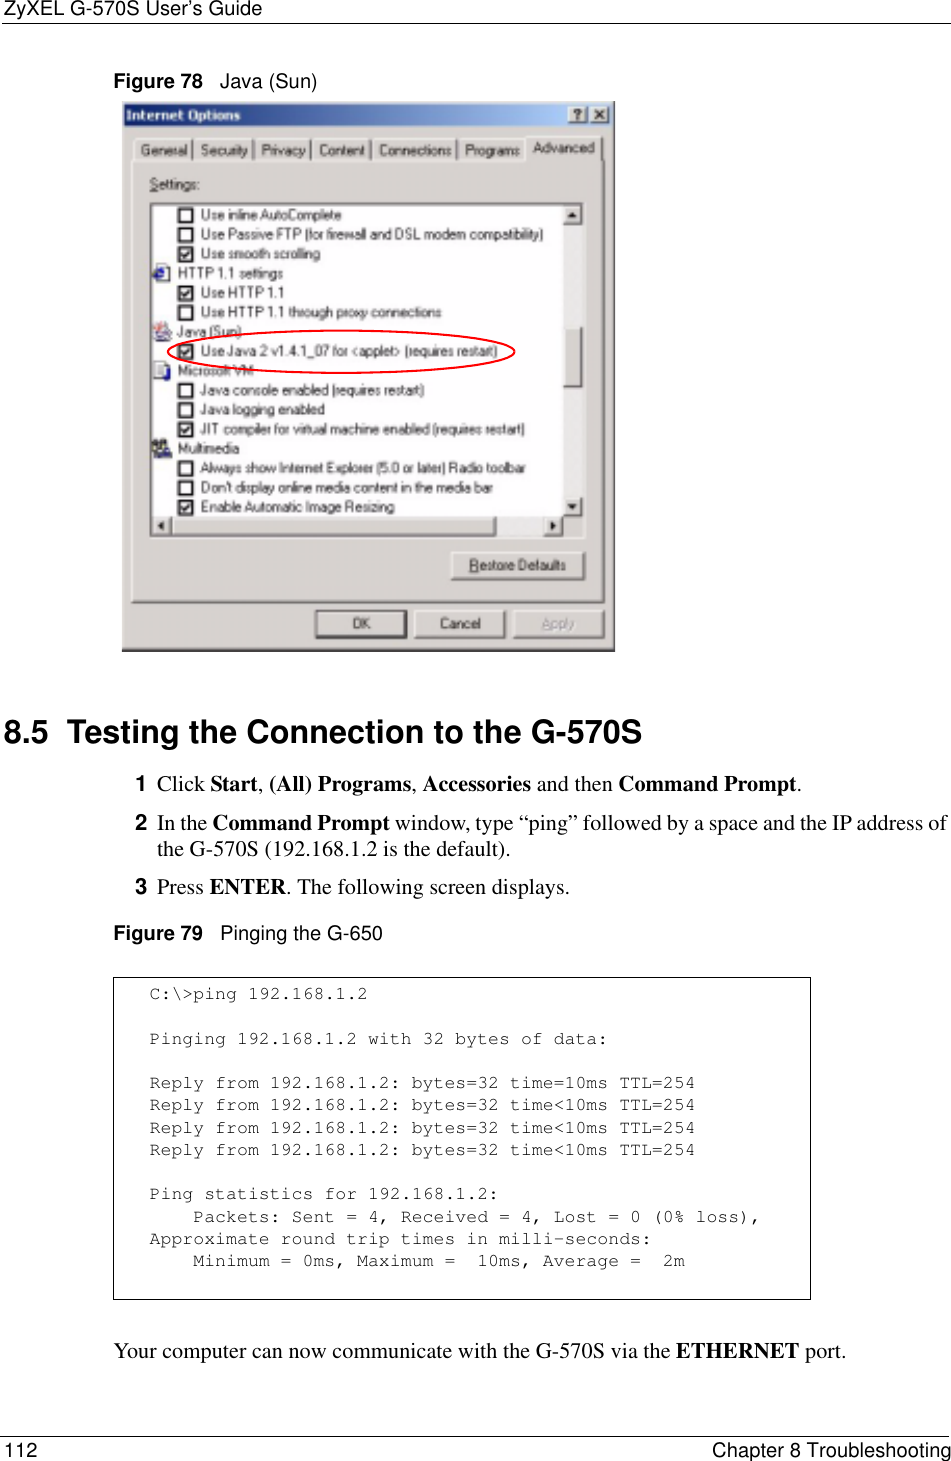 ZyXEL G-570S User’s Guide112 Chapter 8 TroubleshootingFigure 78   Java (Sun)8.5  Testing the Connection to the G-570S1Click Start,(All) Programs,Accessories and then Command Prompt.2In the Command Prompt window, type “ping” followed by a space and the IP address of the G-570S (192.168.1.2 is the default).3Press ENTER. The following screen displays.Figure 79   Pinging the G-650Your computer can now communicate with the G-570S via the ETHERNET port.C:\&gt;ping 192.168.1.2Pinging 192.168.1.2 with 32 bytes of data:Reply from 192.168.1.2: bytes=32 time=10ms TTL=254Reply from 192.168.1.2: bytes=32 time&lt;10ms TTL=254Reply from 192.168.1.2: bytes=32 time&lt;10ms TTL=254Reply from 192.168.1.2: bytes=32 time&lt;10ms TTL=254Ping statistics for 192.168.1.2:    Packets: Sent = 4, Received = 4, Lost = 0 (0% loss),Approximate round trip times in milli-seconds:    Minimum = 0ms, Maximum =  10ms, Average =  2m